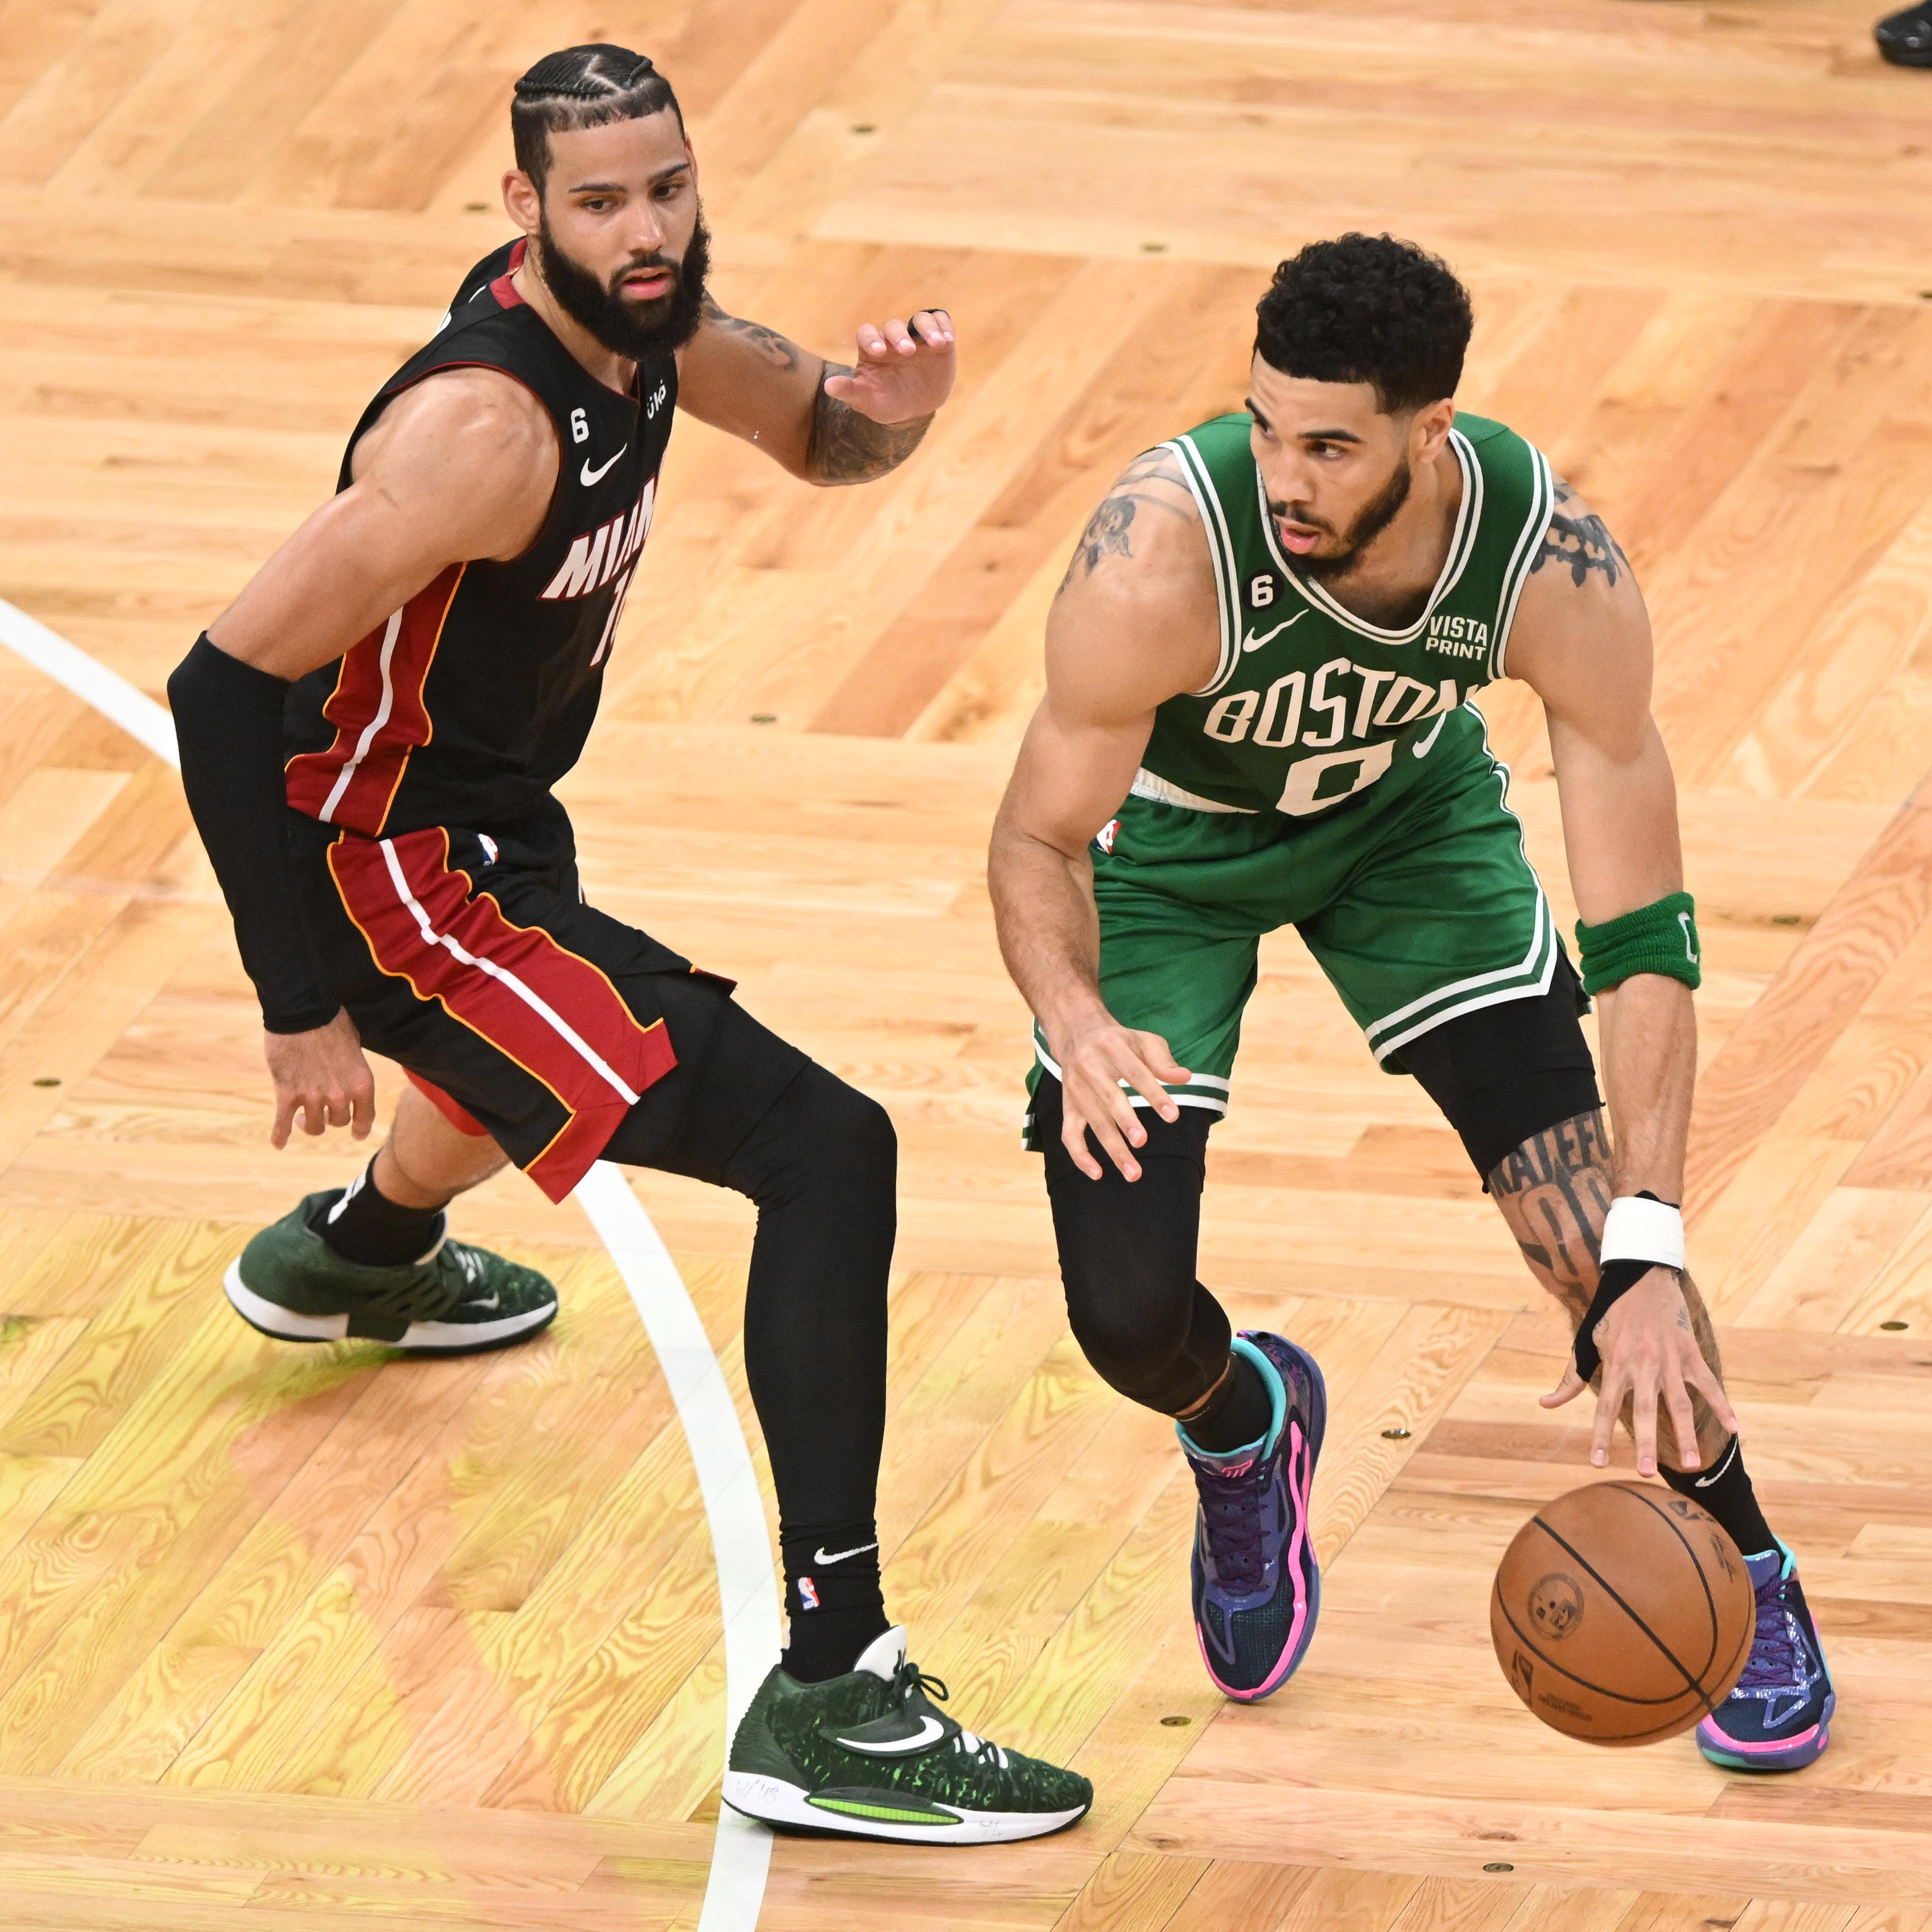 Jayson Tatum controls the ball against Caleb Martin in the second quarter of Game 5 of the Eastern Conference finals.